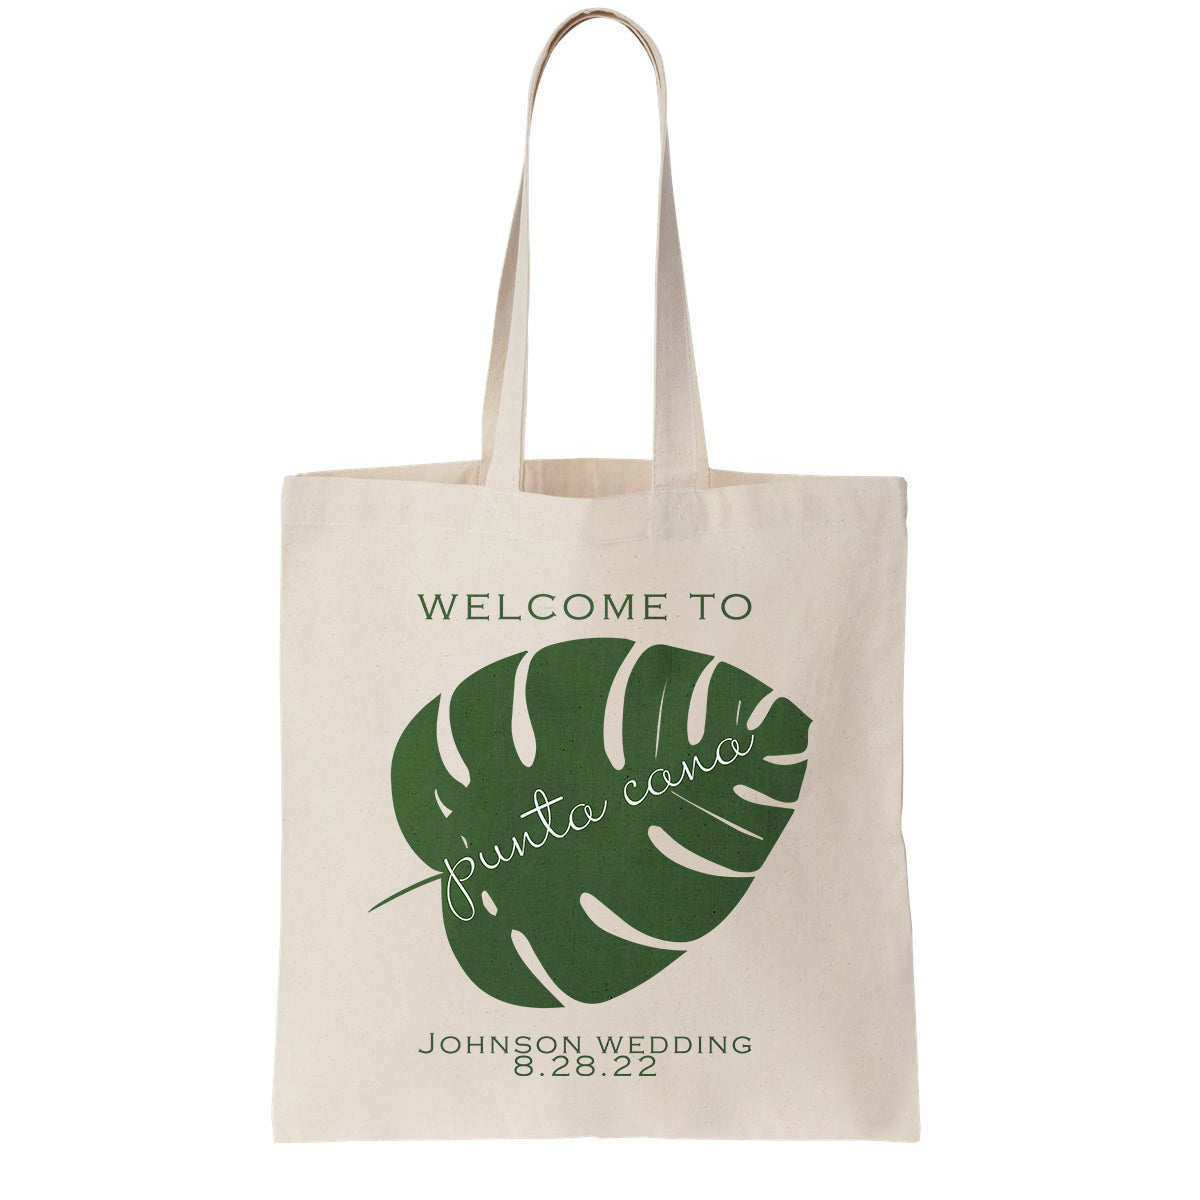 Personalized destination wedding welcome bag with monstera palm